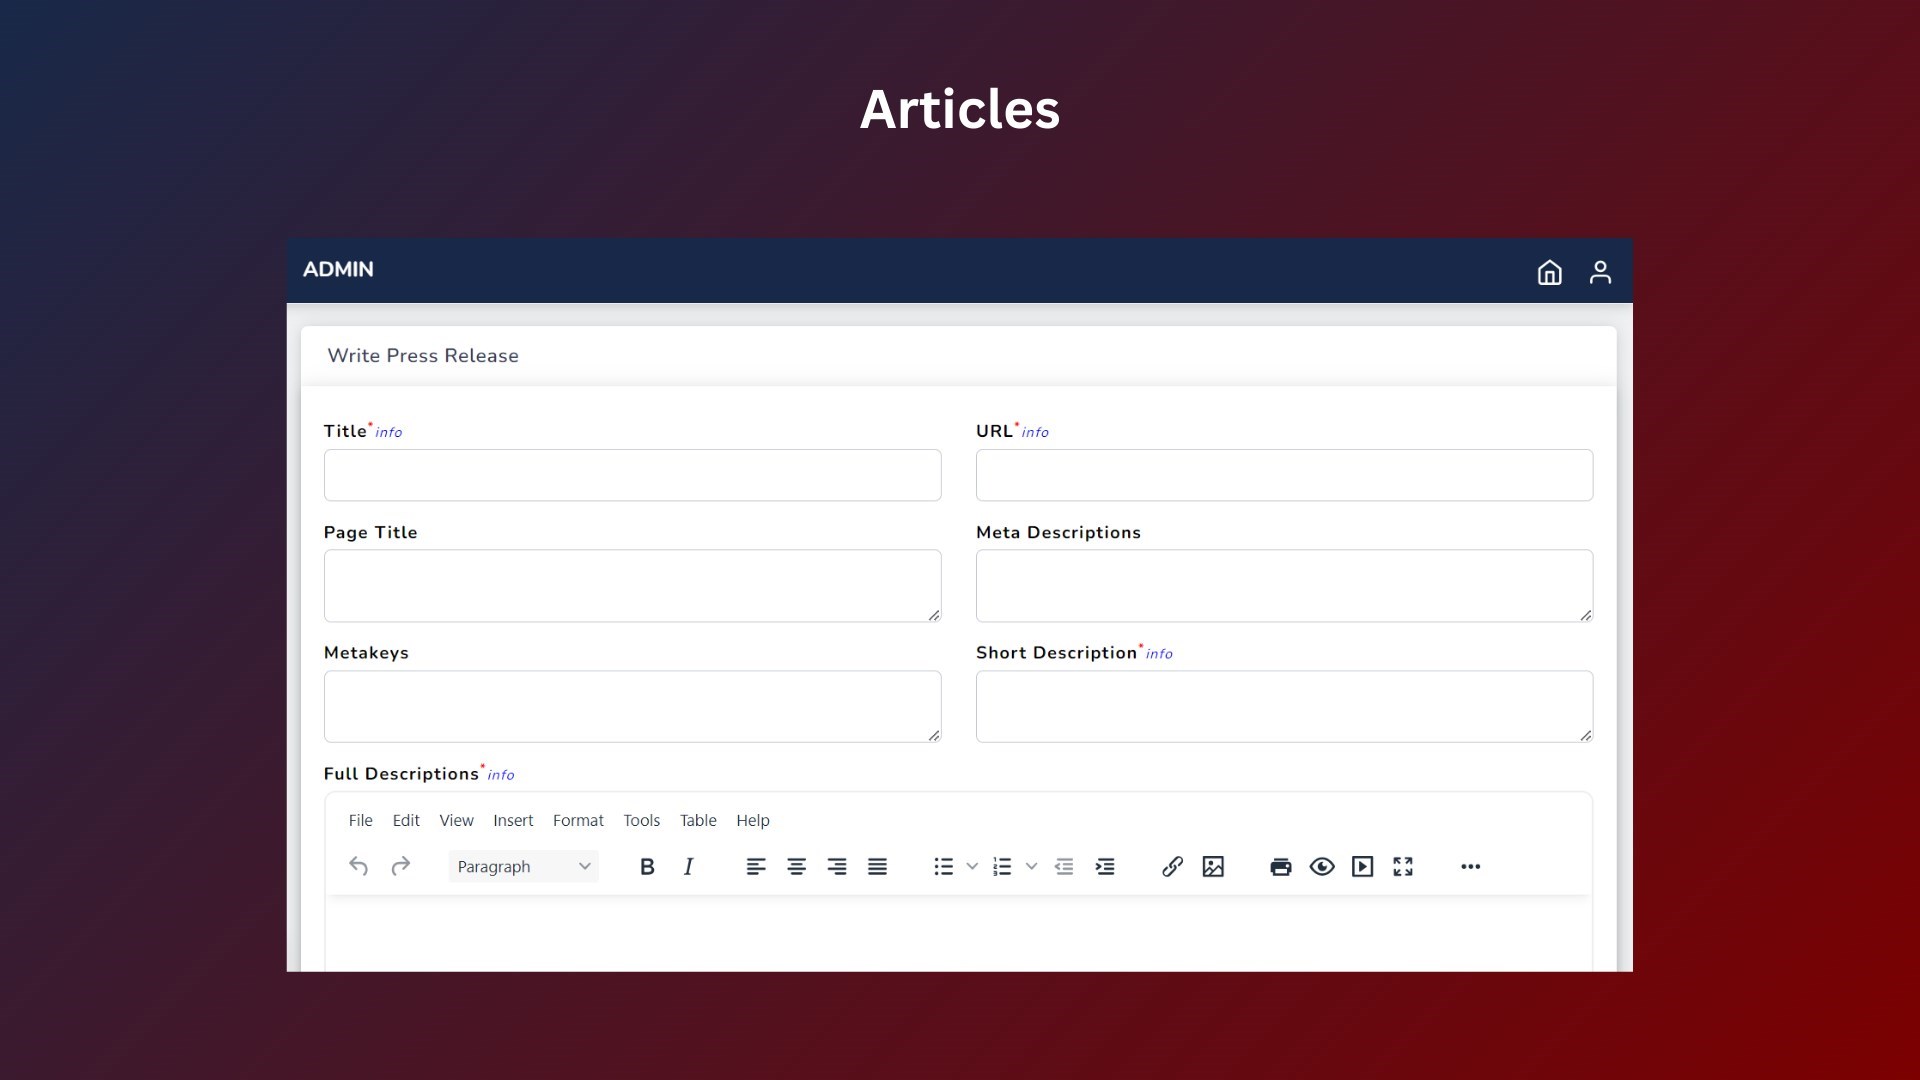 Feature to manage articles with an SEO enhancement option for updating page titles, meta descriptions, and meta titles.